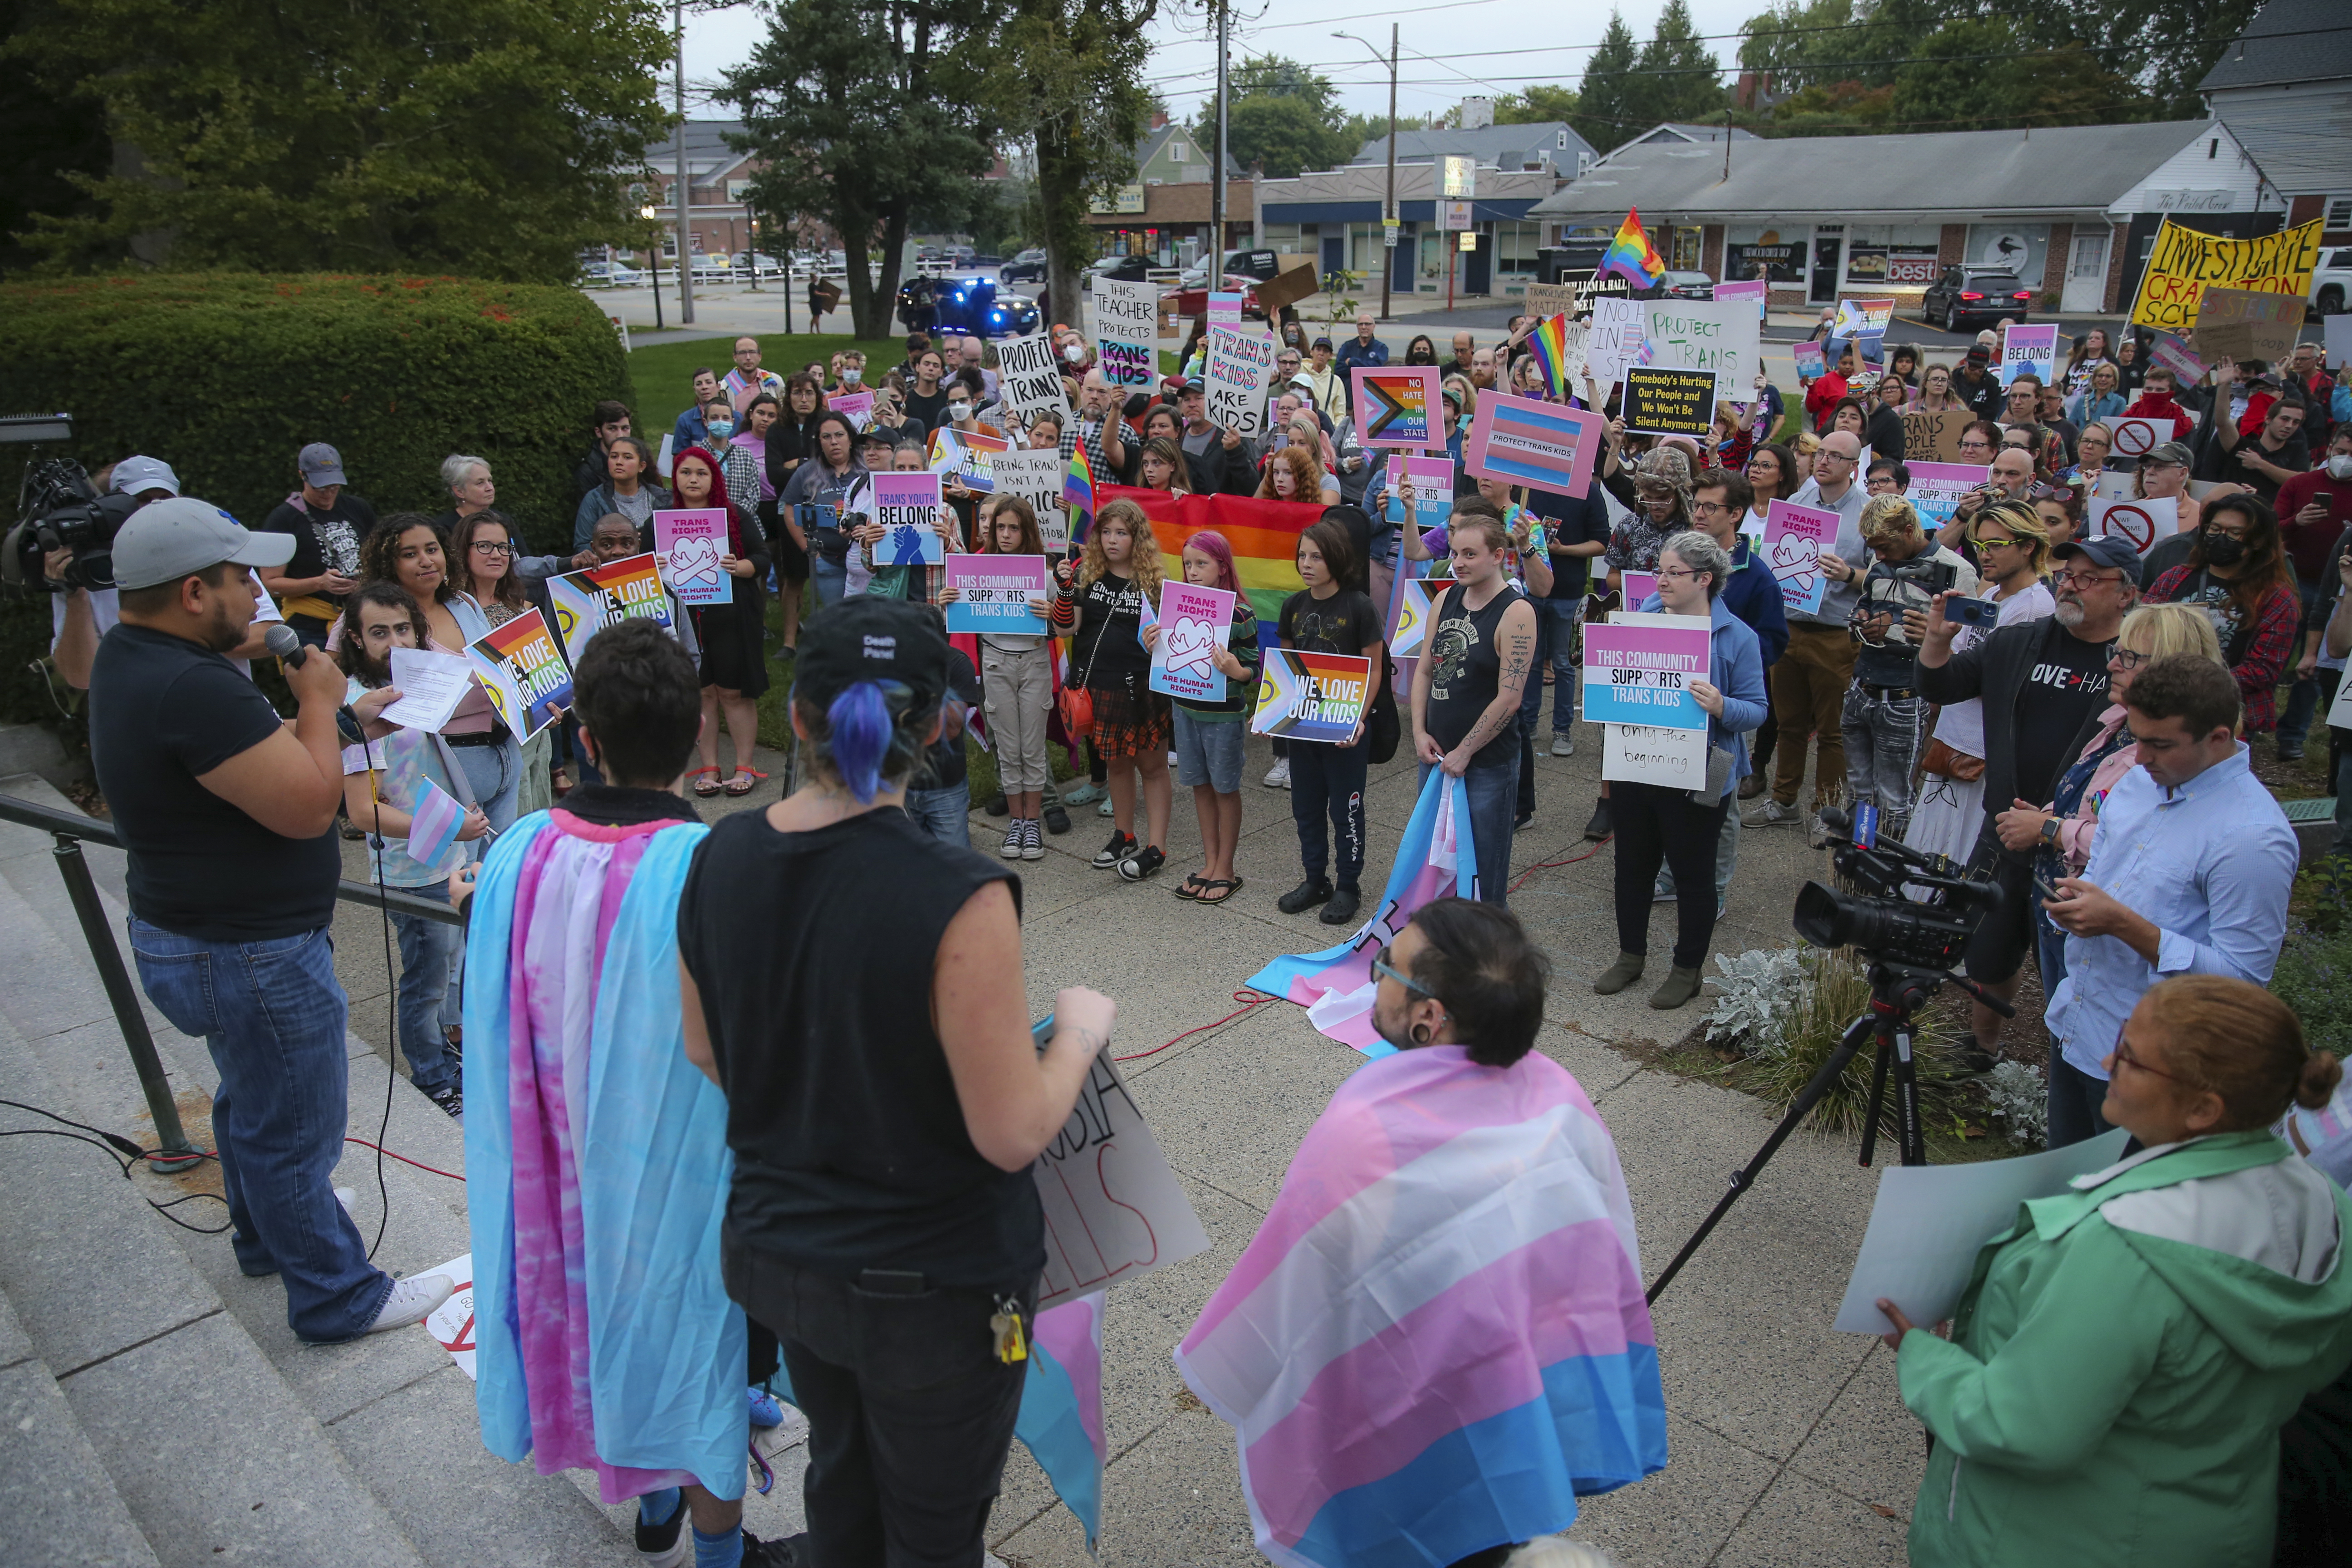 Anti-transgender group sparks anger, protests at event at Cranston library  pic